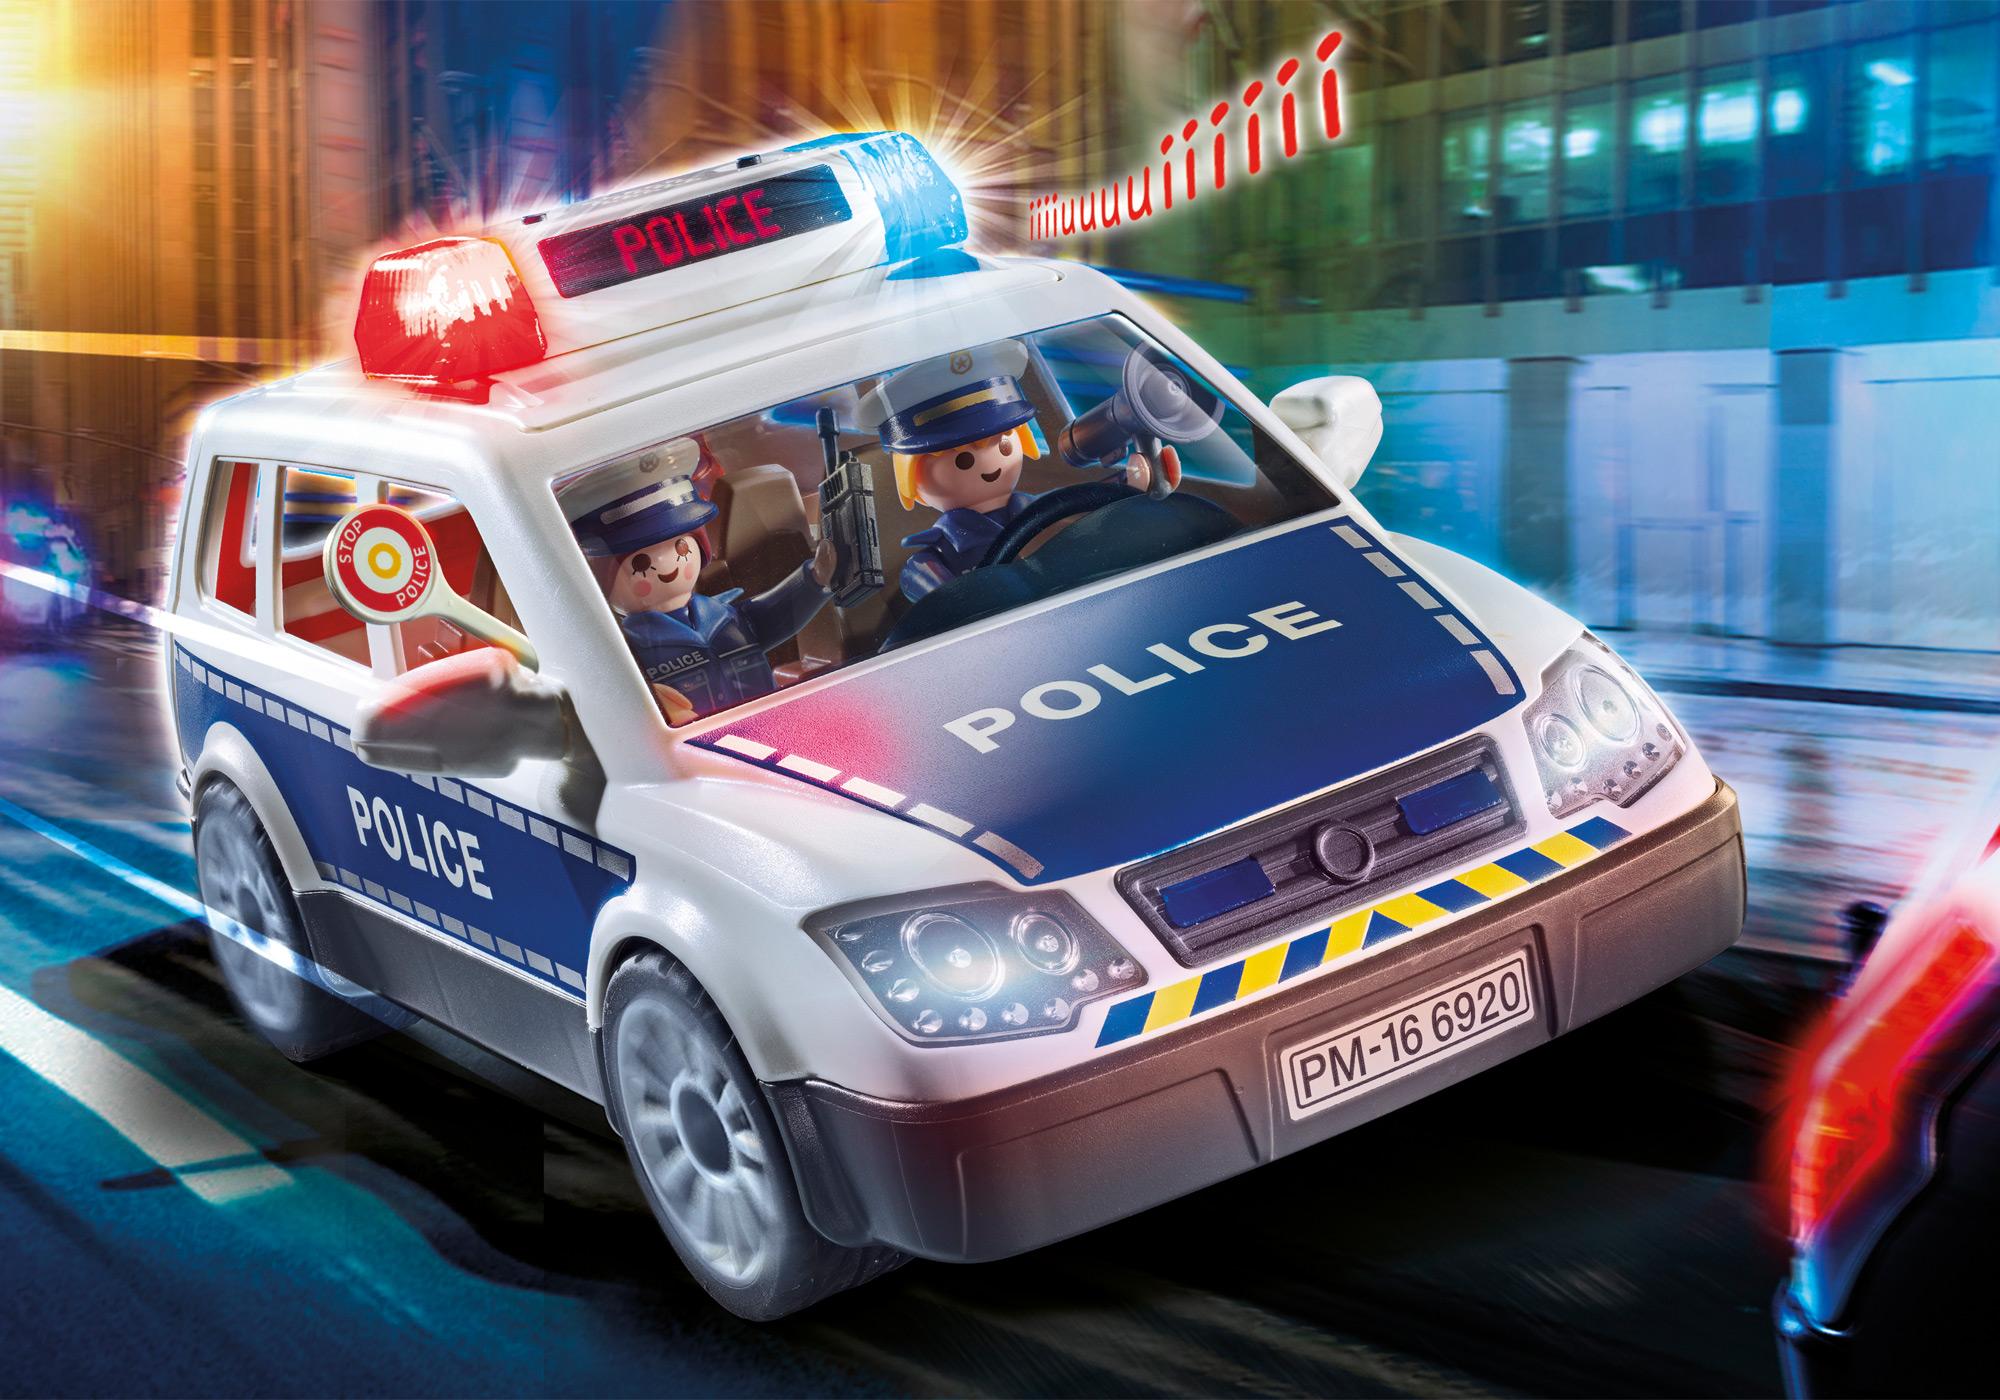 playmobil voiture police